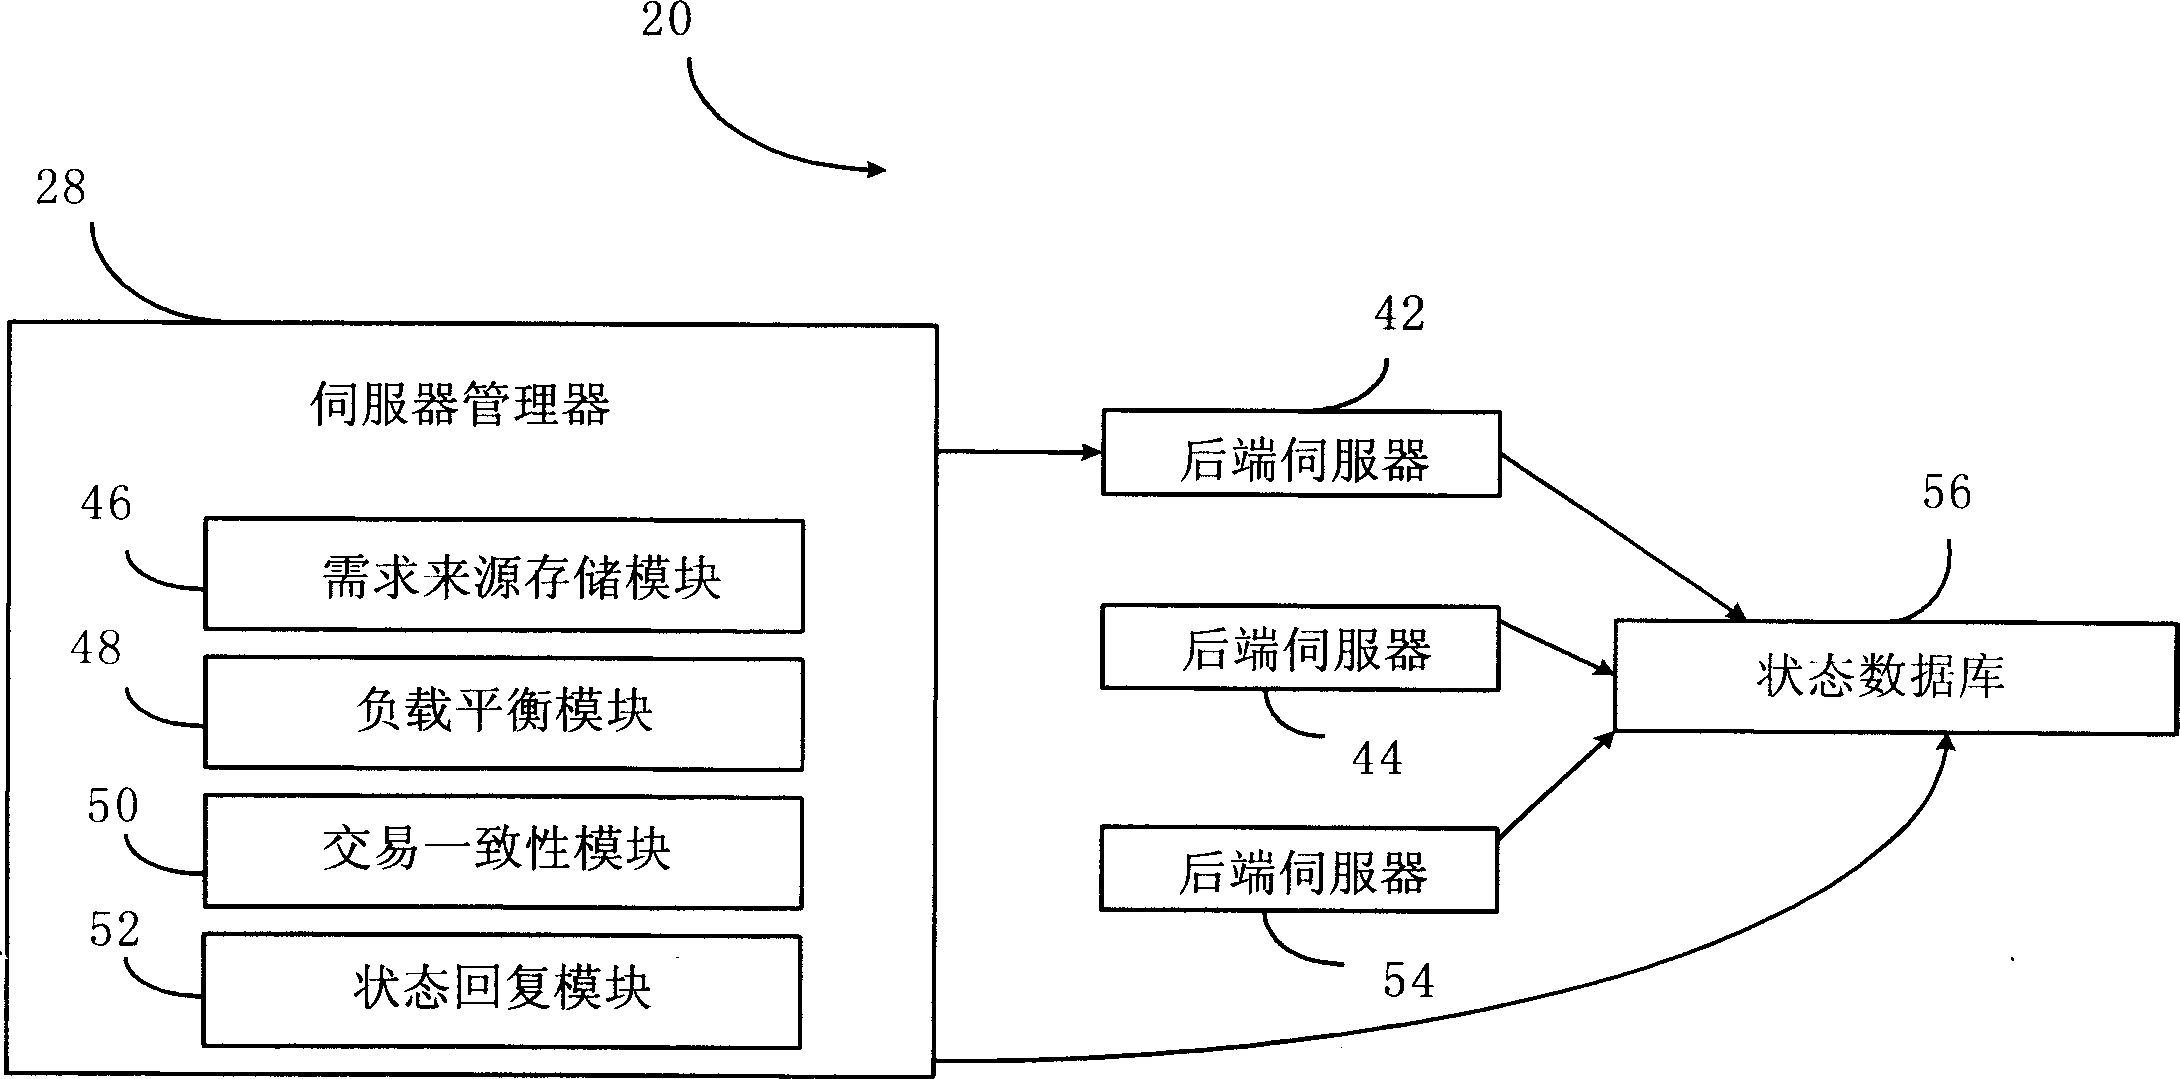 High-load system and service process for achieving the demand